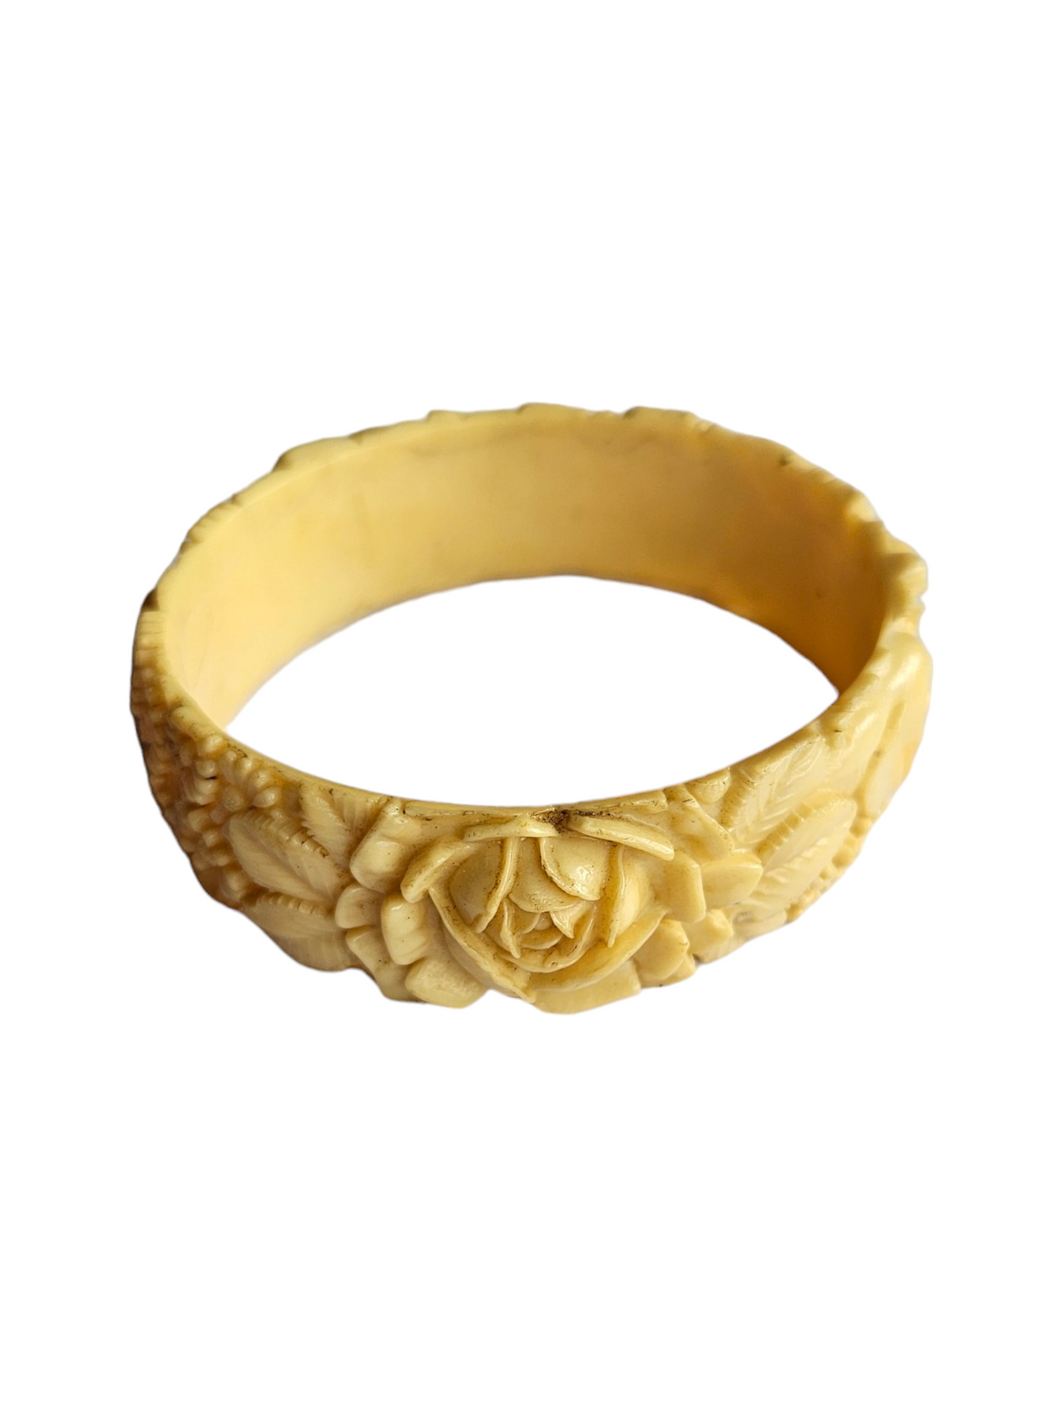 1940s Celluloid Flower and Elephant Bangle